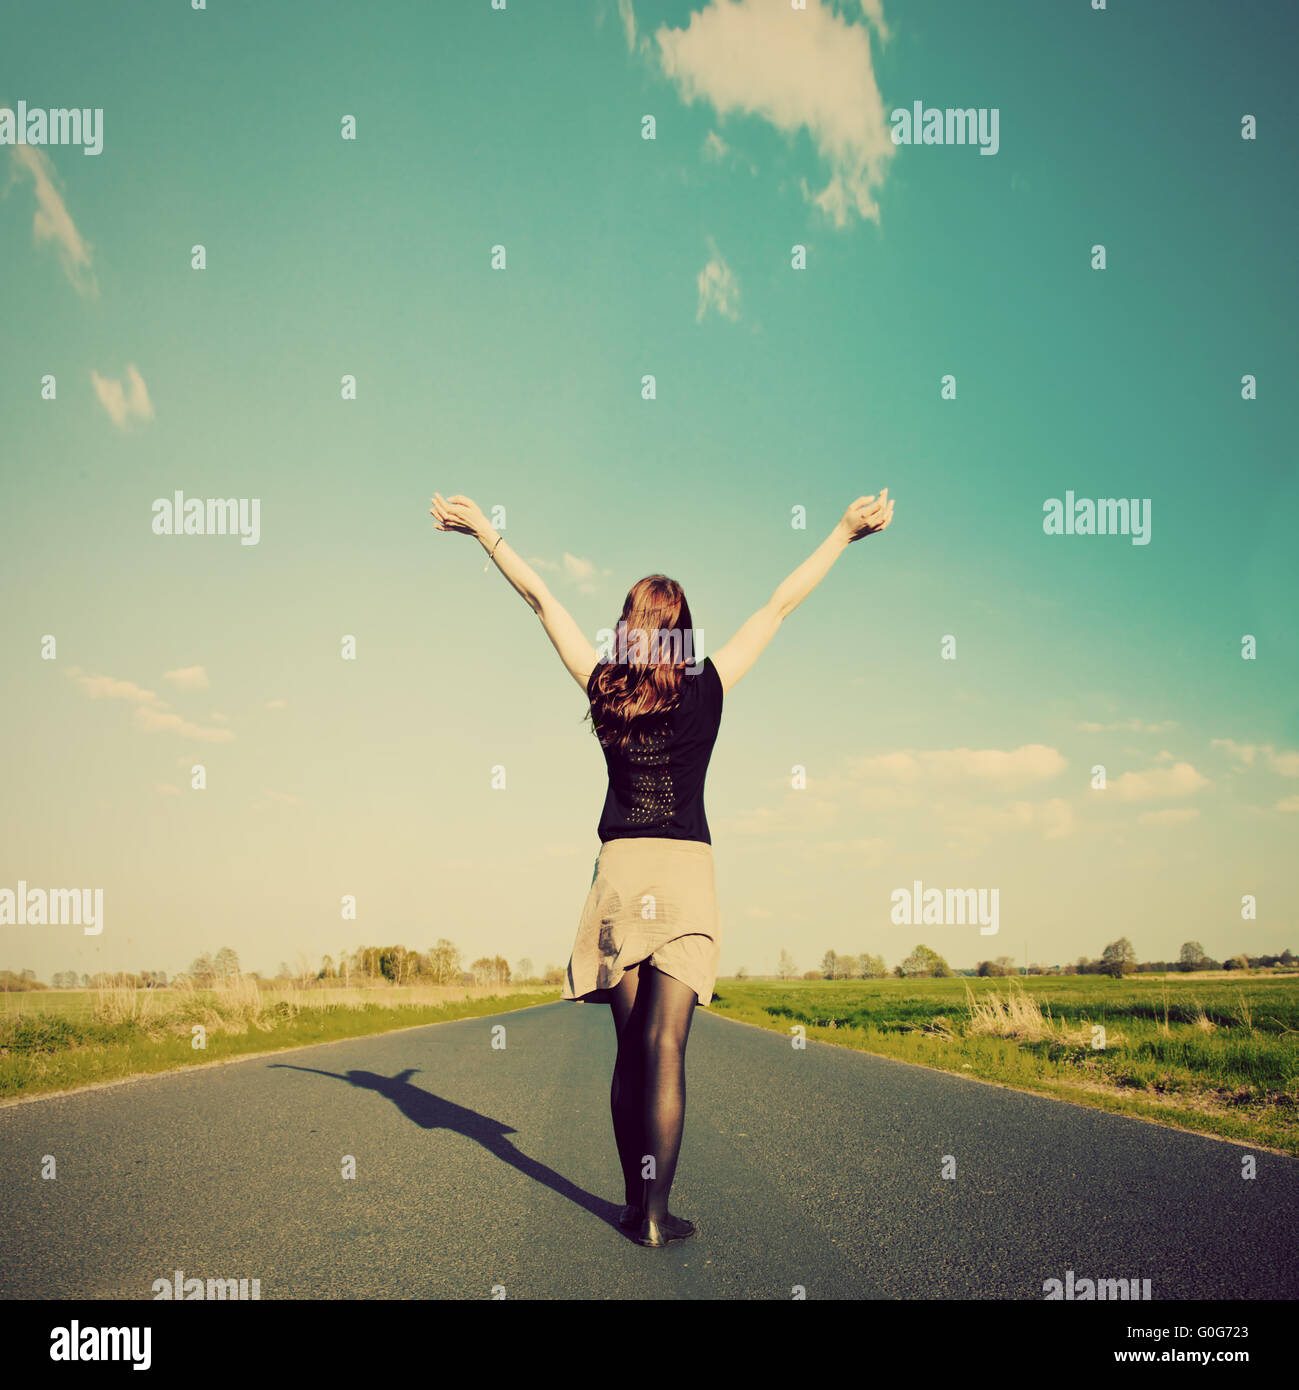 Happy woman standing on empty road. Style rétro vintage Banque D'Images